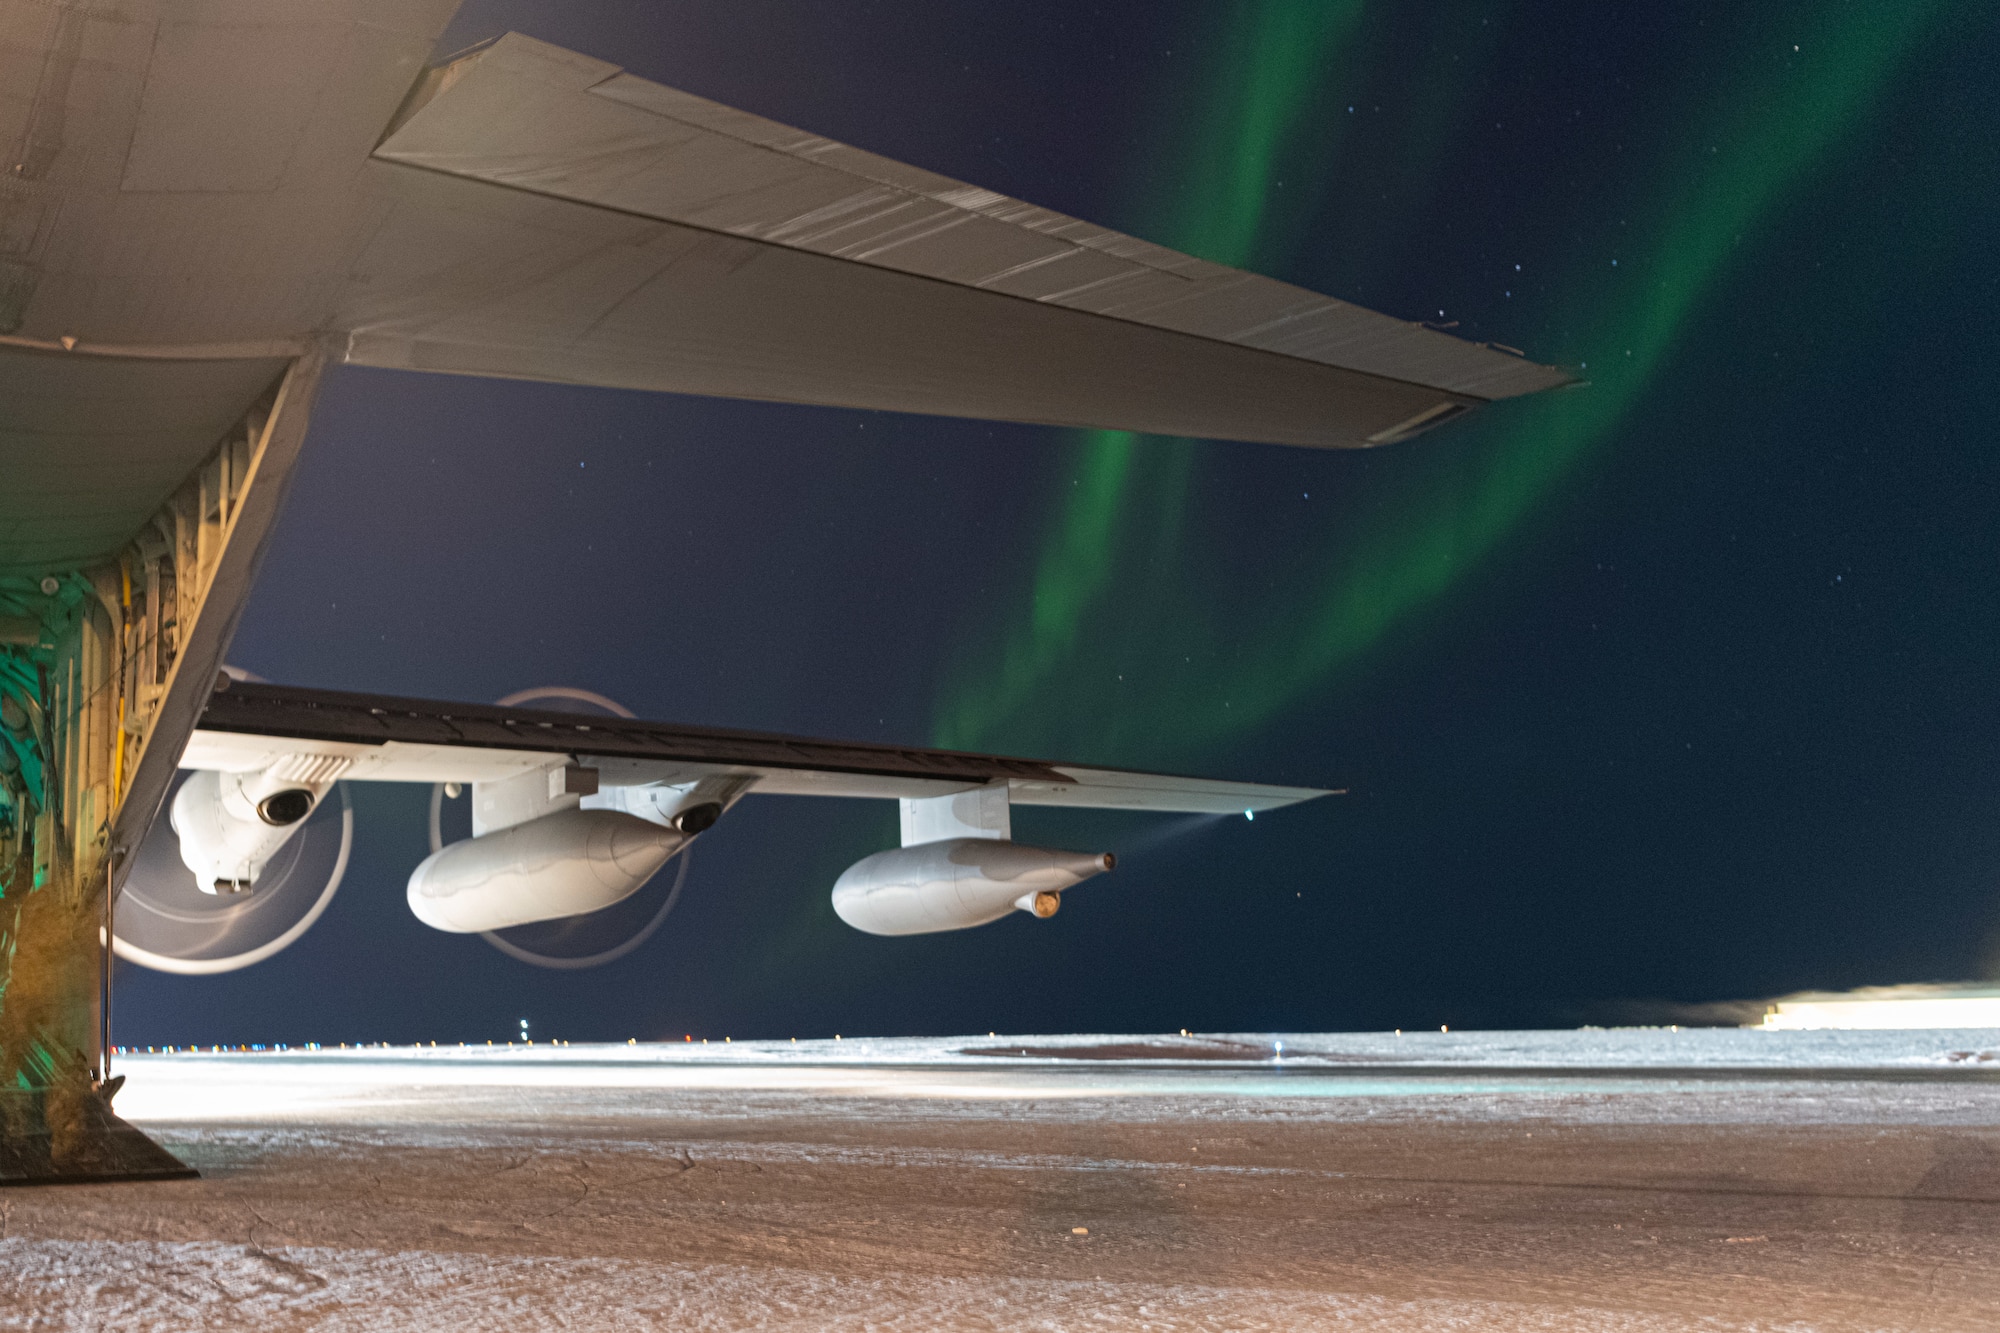 An MC-130J Commando II assigned to the 27th Special Operations Wing, is parked on the runway with the Northern Lights overhead during Arctic Edge 24 in Utqiagvik, Alaska, Feb. 29, 2024. Arctic Edge 24 provides Special Operations Command North the opportunity to test a range of capabilities and response options to deter, disrupt, degrade, and deny competitor activity in the Arctic in support of globally integrated layered defense and deterrence of the homeland. (U.S. Air Force photo by Senior Airman Drew Cyburt)